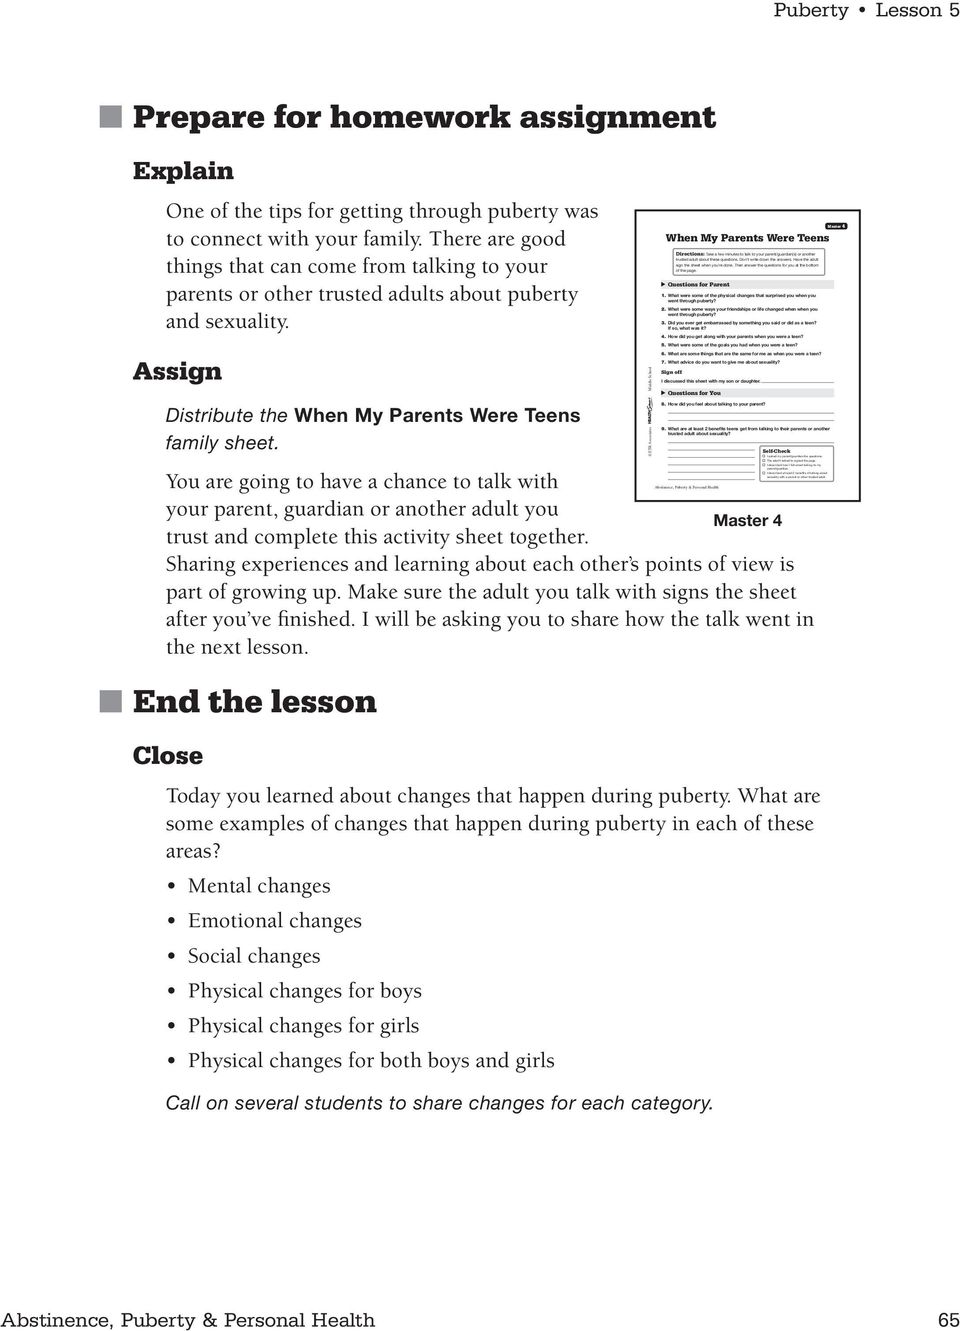 Puberty Lesson 5 Prepare for homework assignment Explain One of the tips for getting through puberty was to connect with your family.